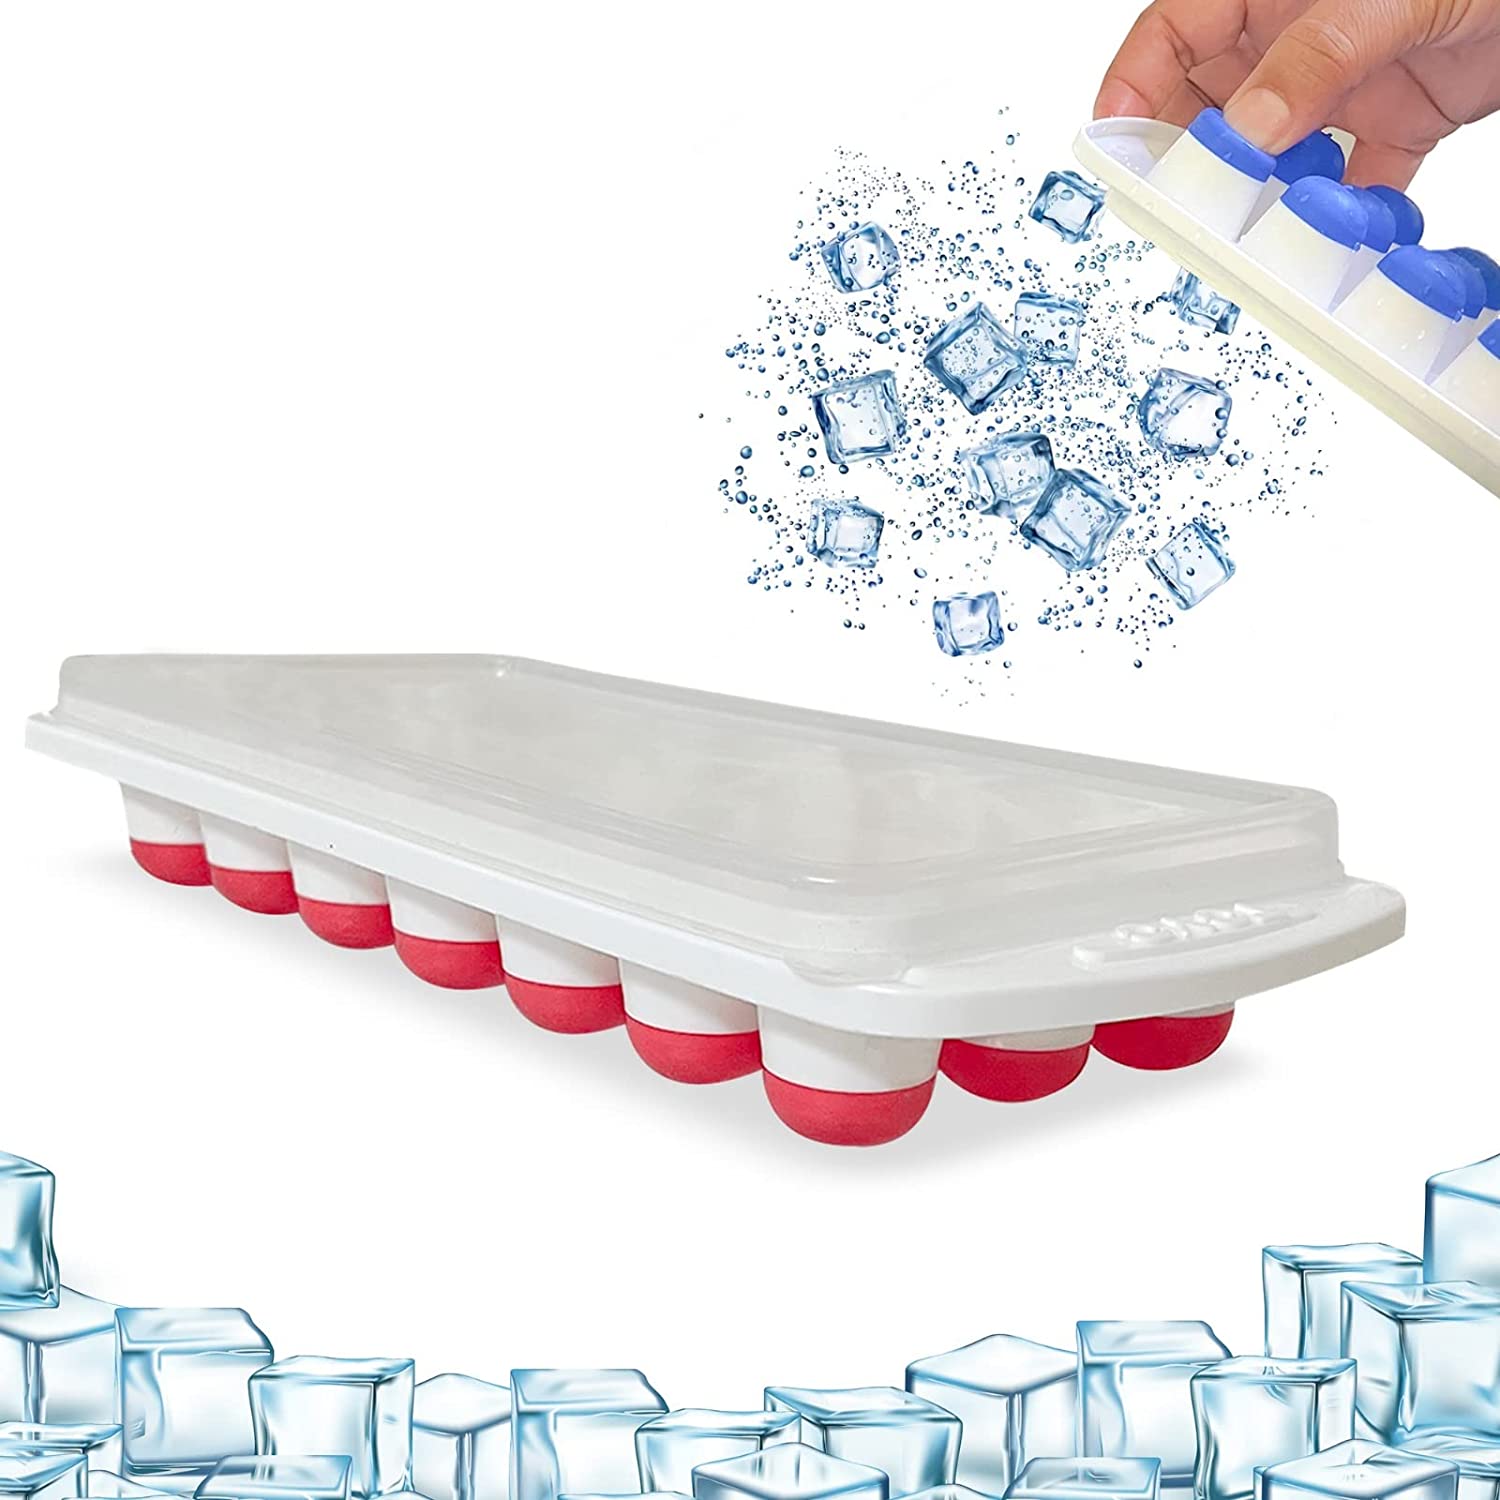 Mannat 1pc 21 Cavity Pop Up Ice Cube Trays with Lid for Freezer with Easy Release Flexible Silicone Bottom,Stackable(Multicolor/Random Color Sent)